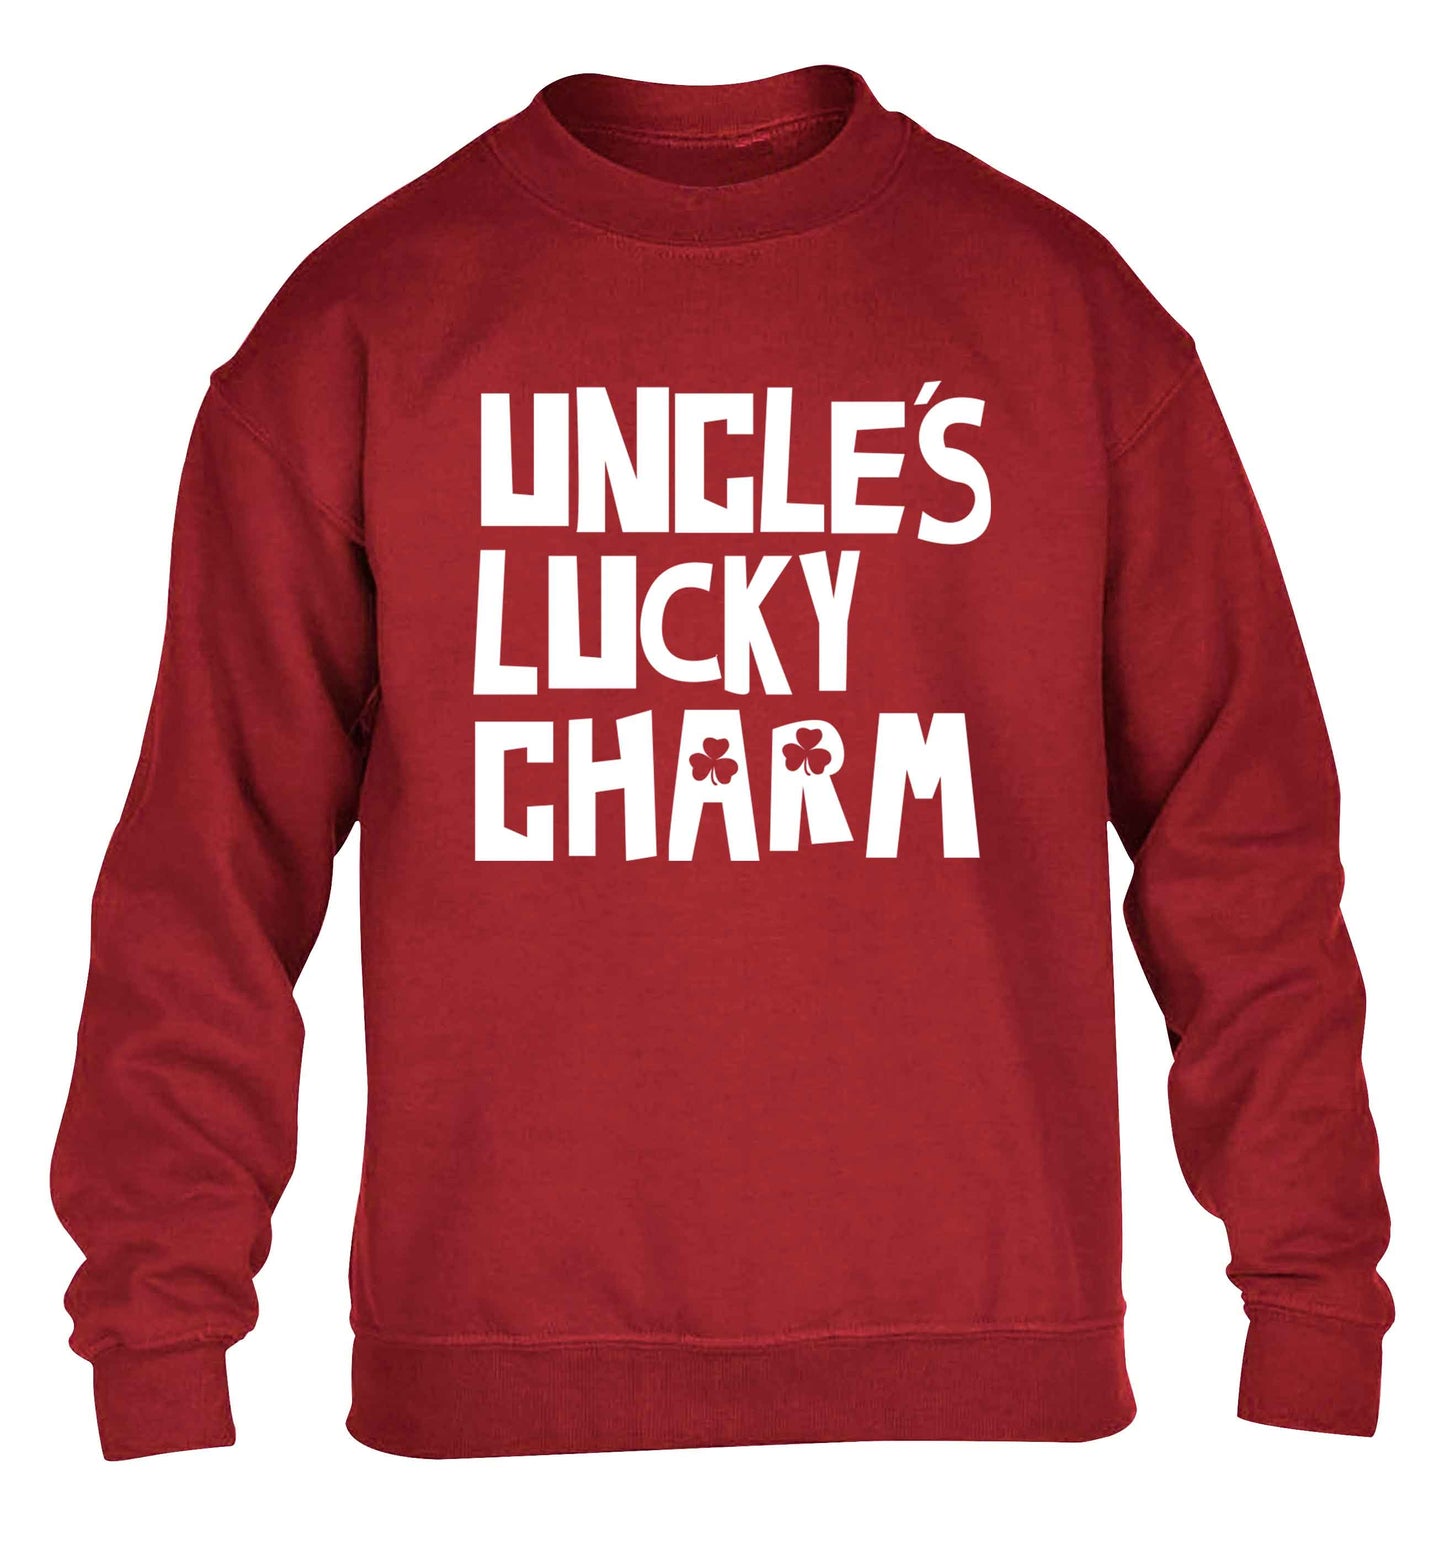 Uncles lucky charm children's grey sweater 12-13 Years